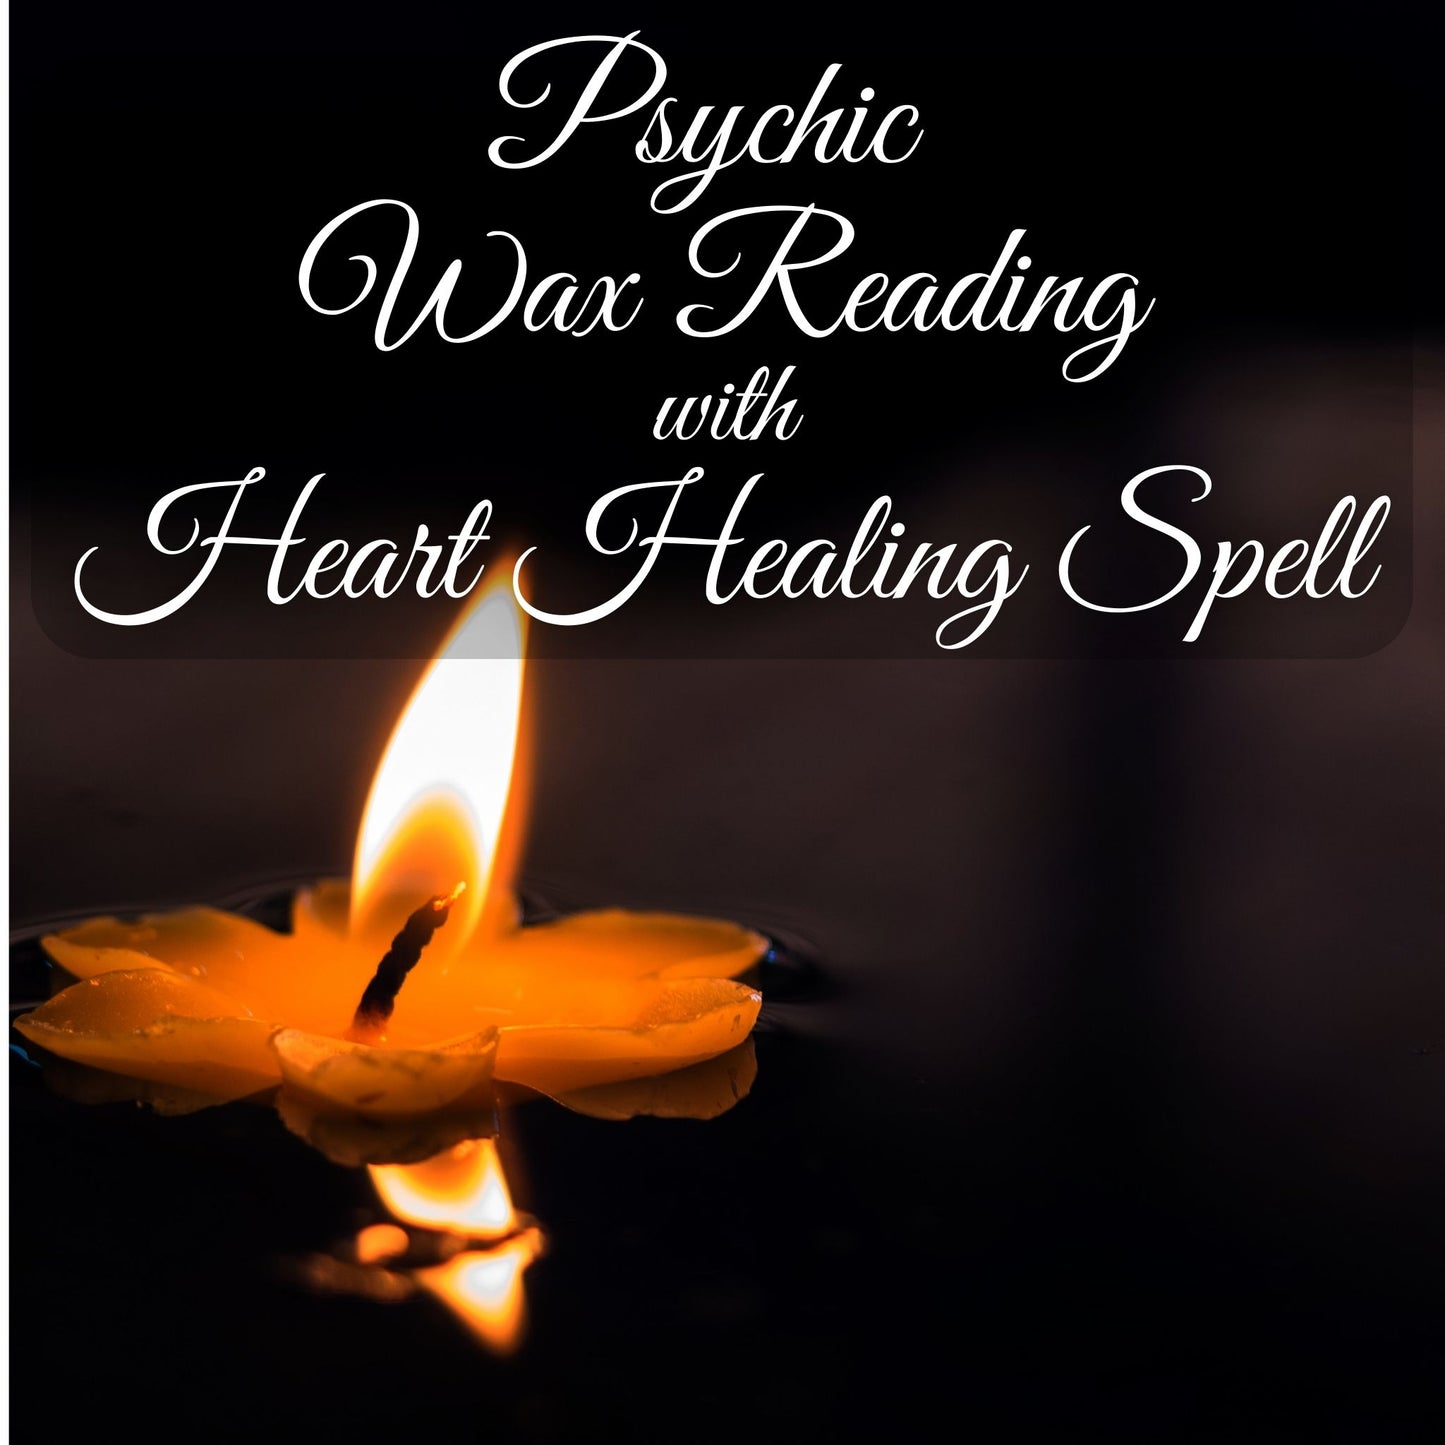 Psychic Wax Reading with Heart Healing Spell